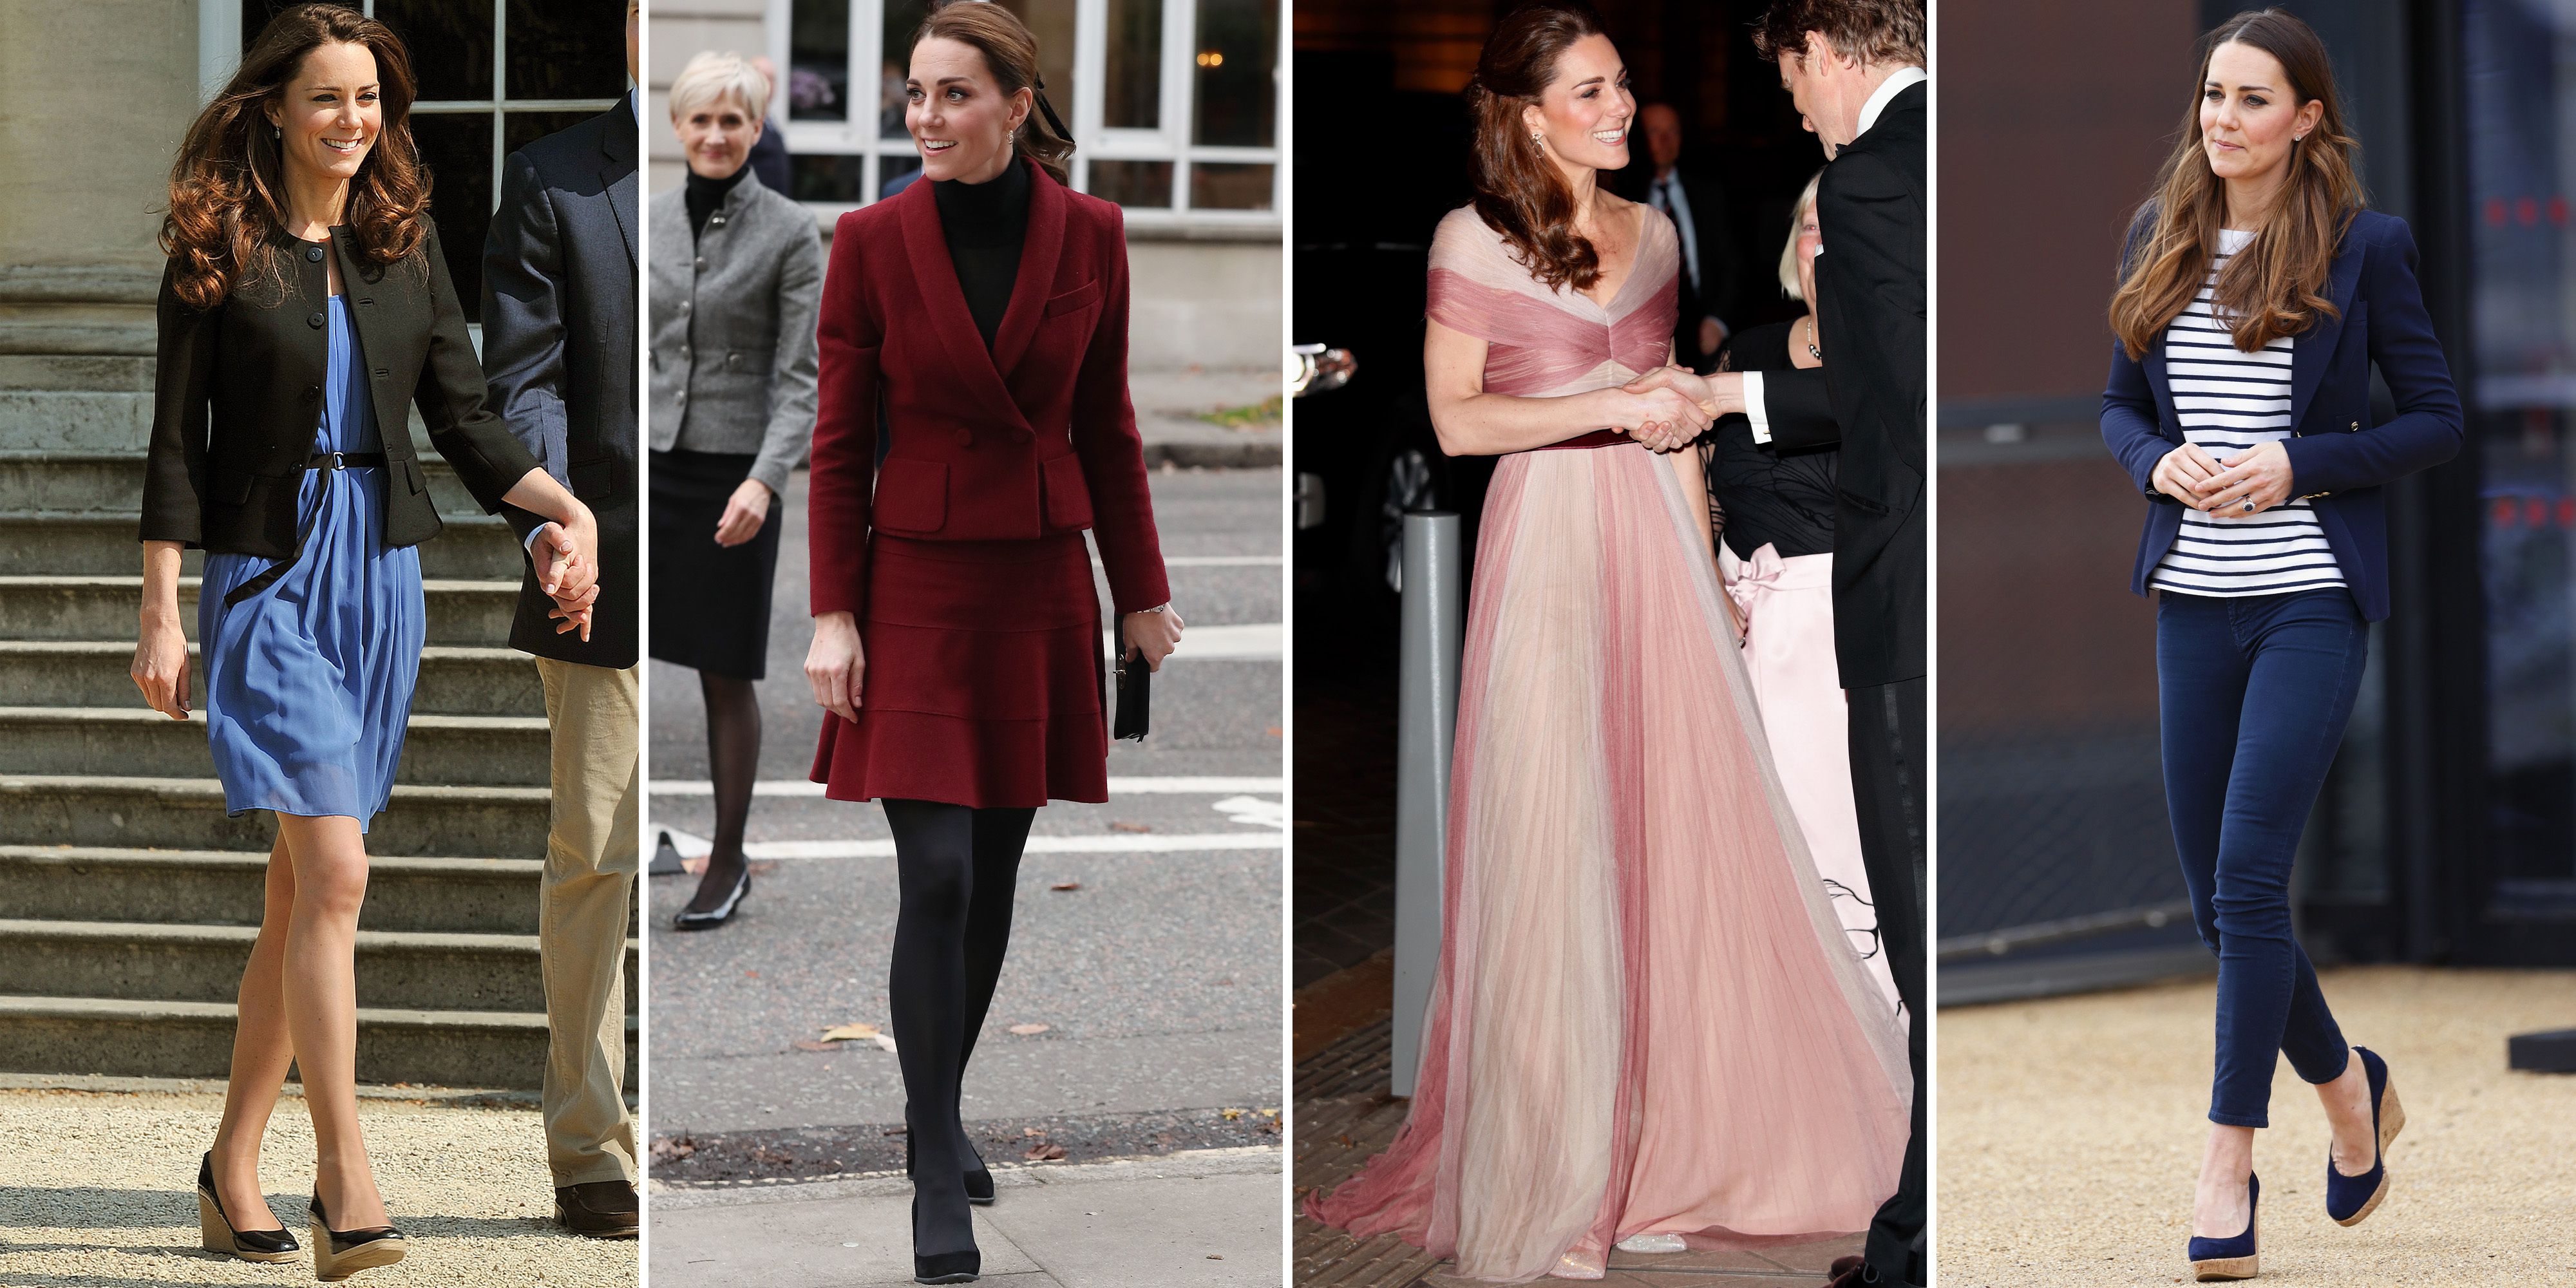 This Will Mark Kate 10th Year of Being a Duchess. Here's How She's Changed Royal Fashion Forever.